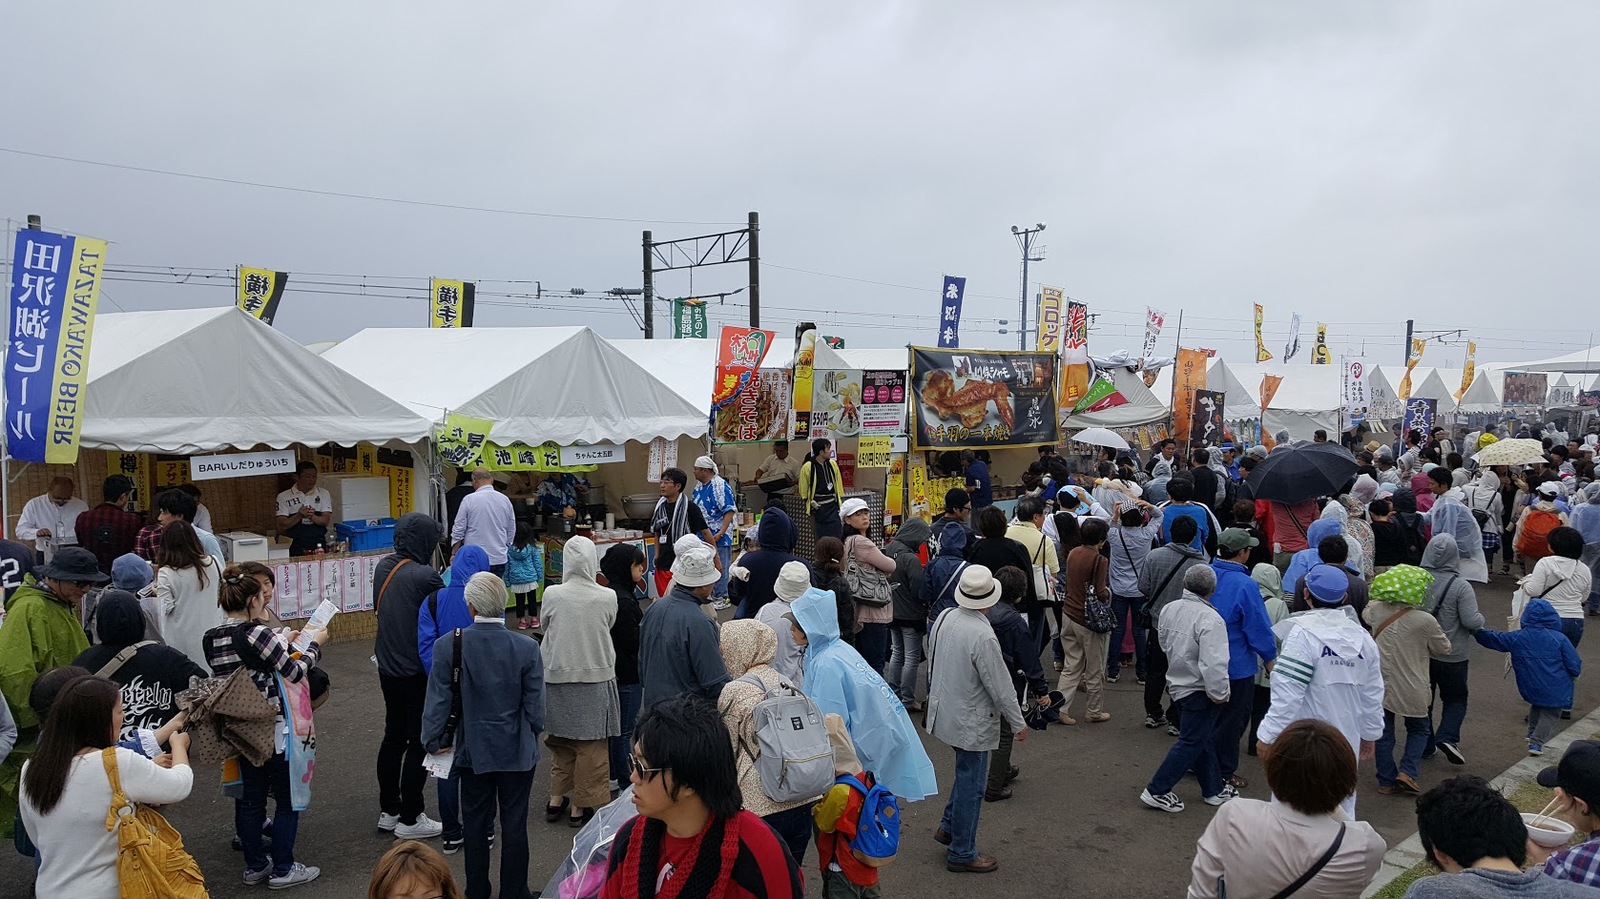 Aomori and the way to the north | Japan in a month - My, Travels, Japan, Asia, The festival, North, Bus, Tokyo, Drive, Longpost